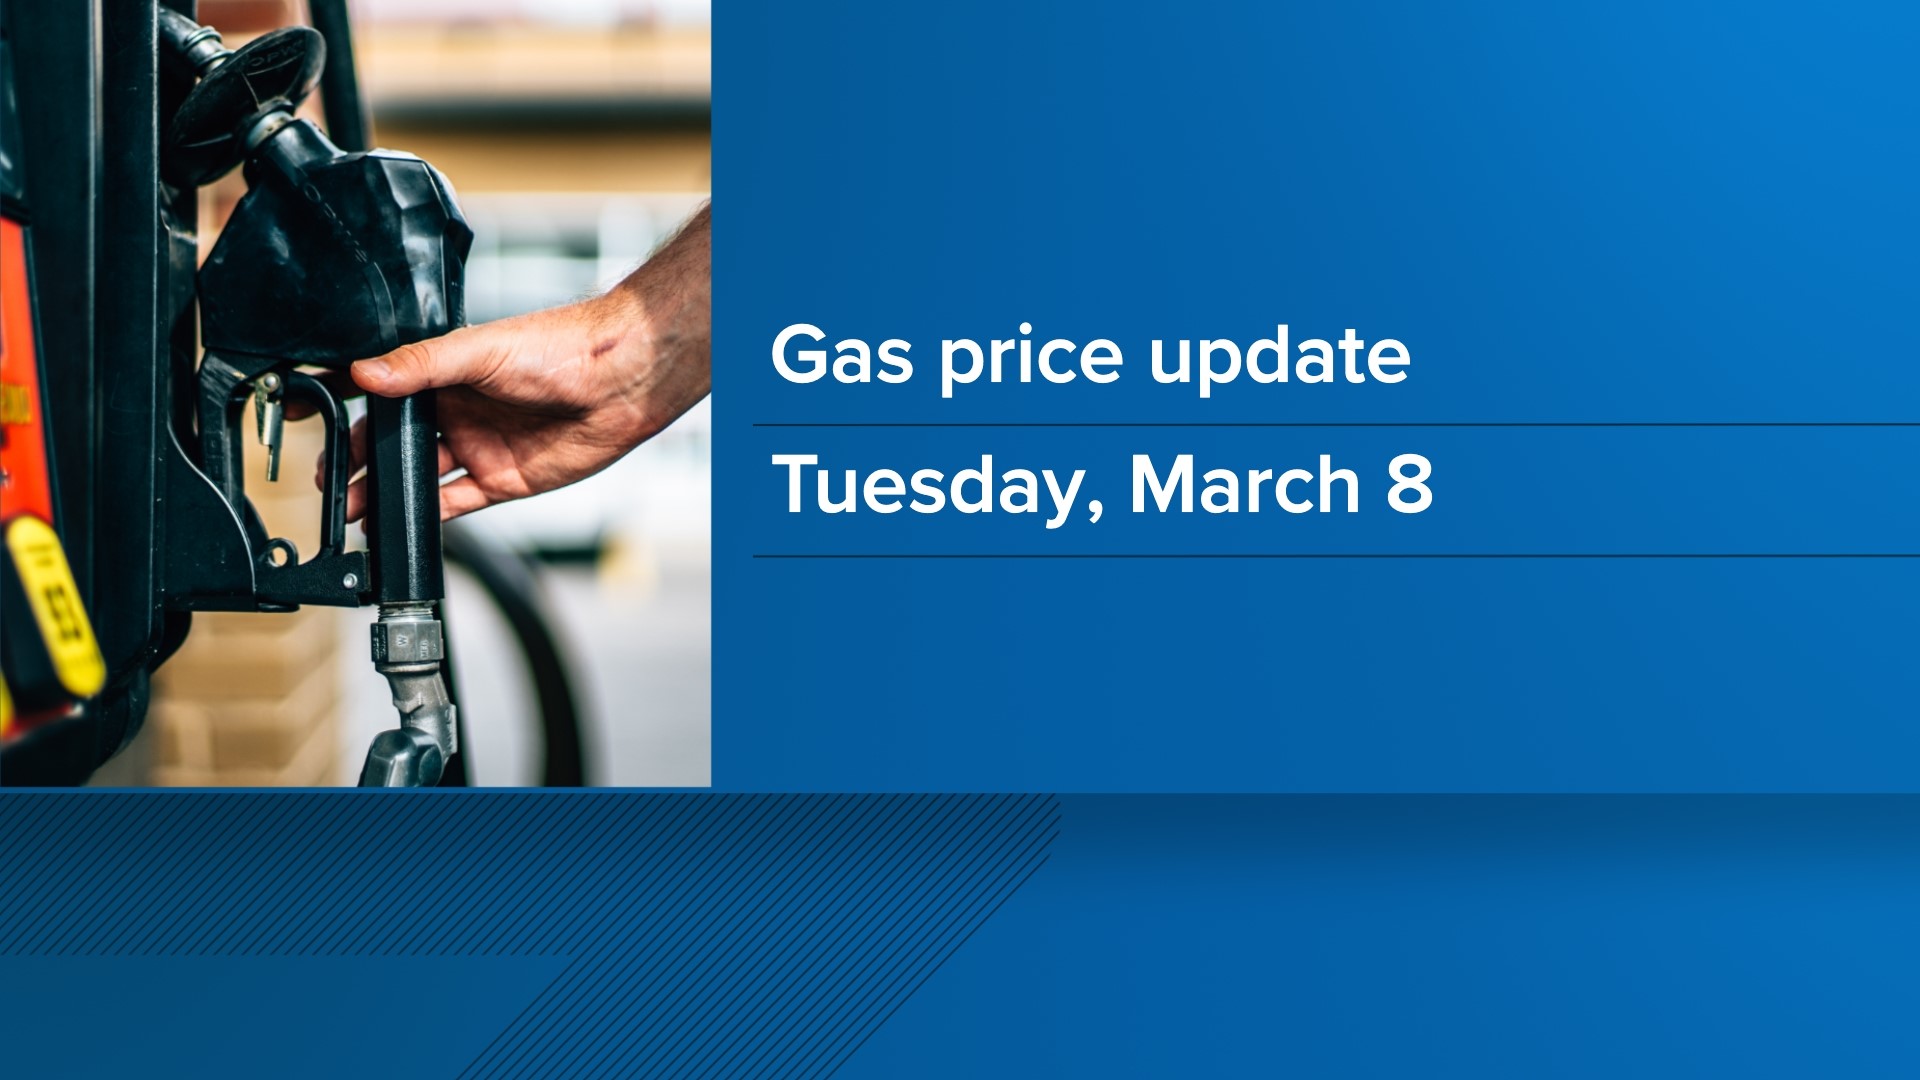 The average price for a gallon of gas in Pennsylvania has now reached over $4.30.